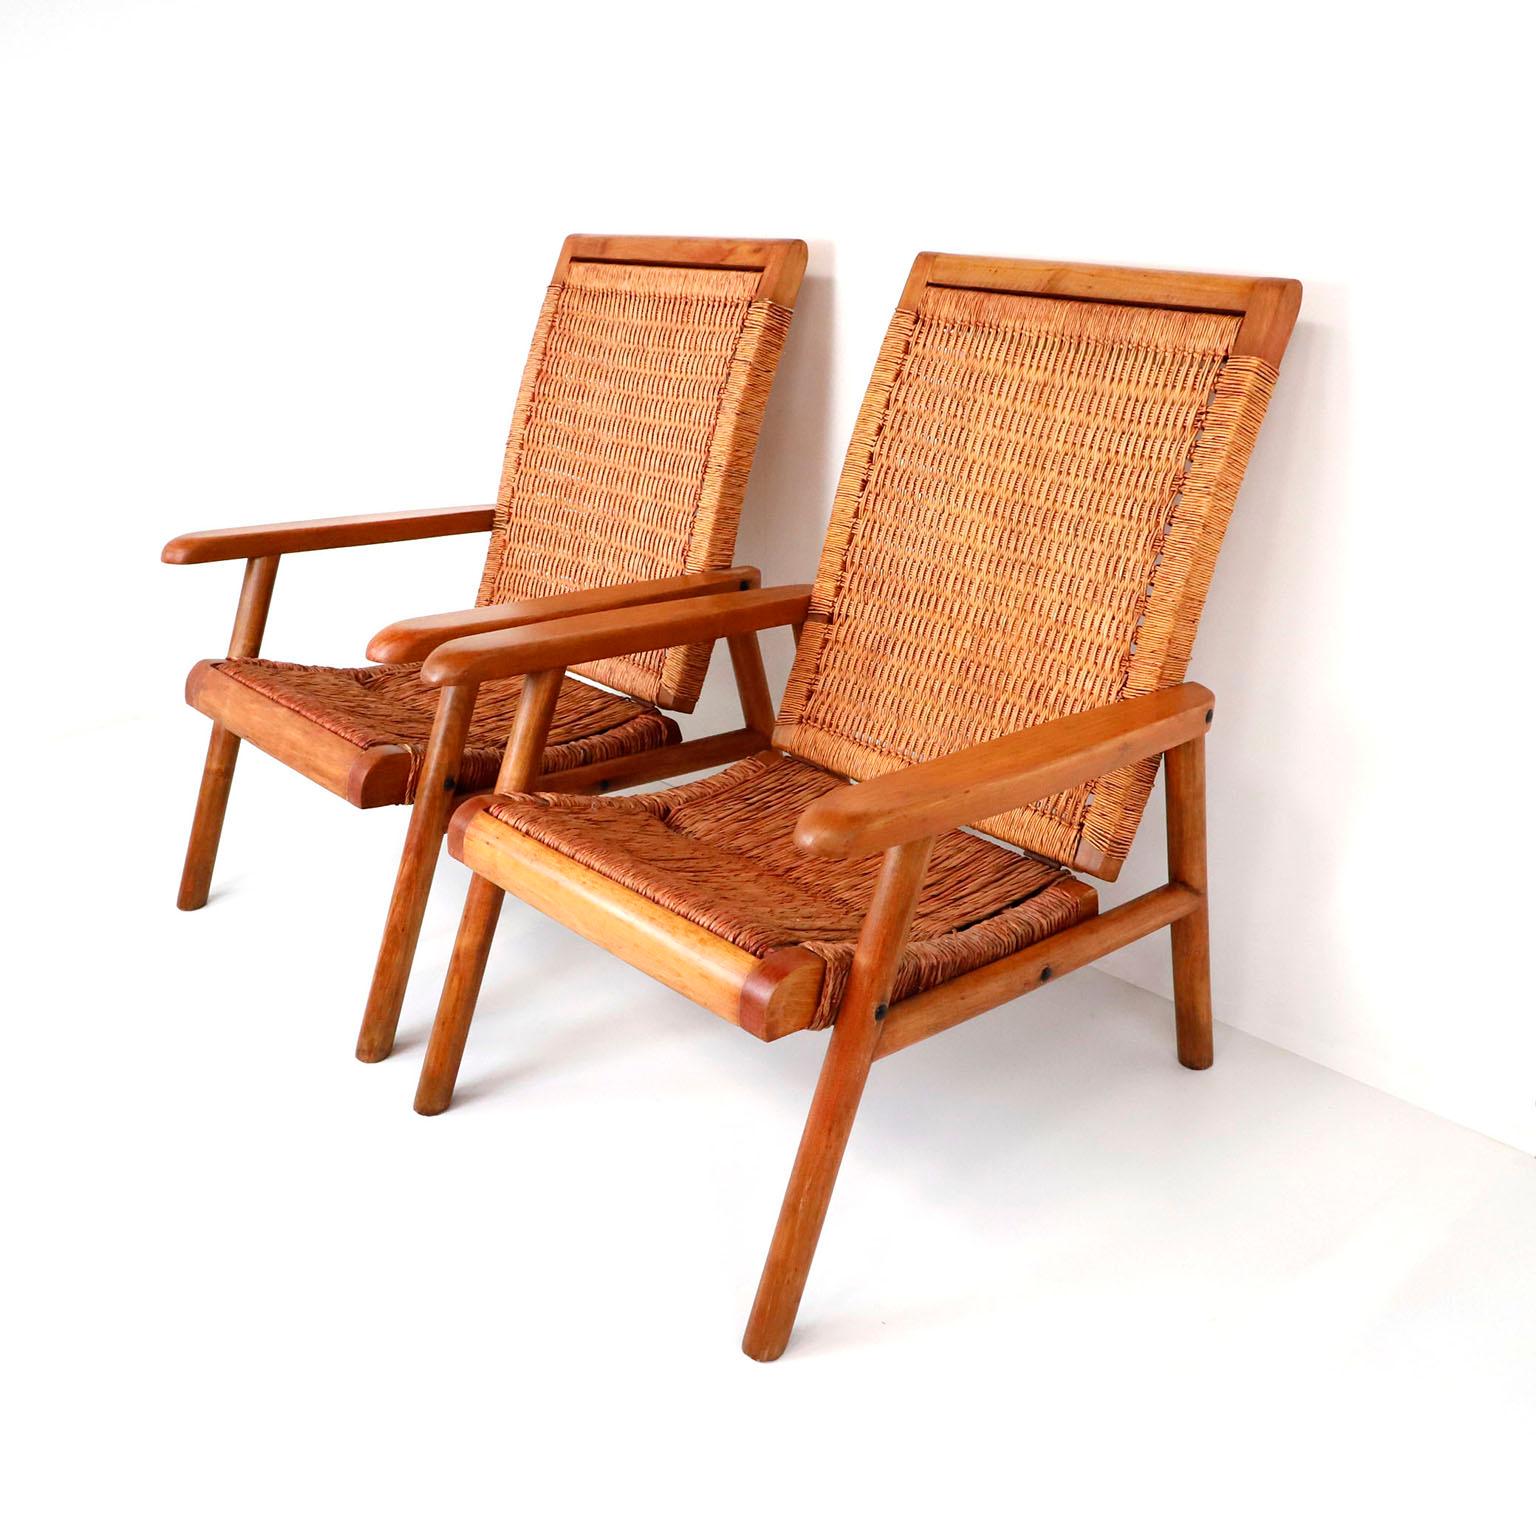 Pair of Mexican Mid-Century Modern woven lounge chairs made in the 1950s. Featuring simple but elegant modern frames and a curvaceous seat, this chair provides a surprising amount of comfort with its beautifully woven seat. The chair is in great